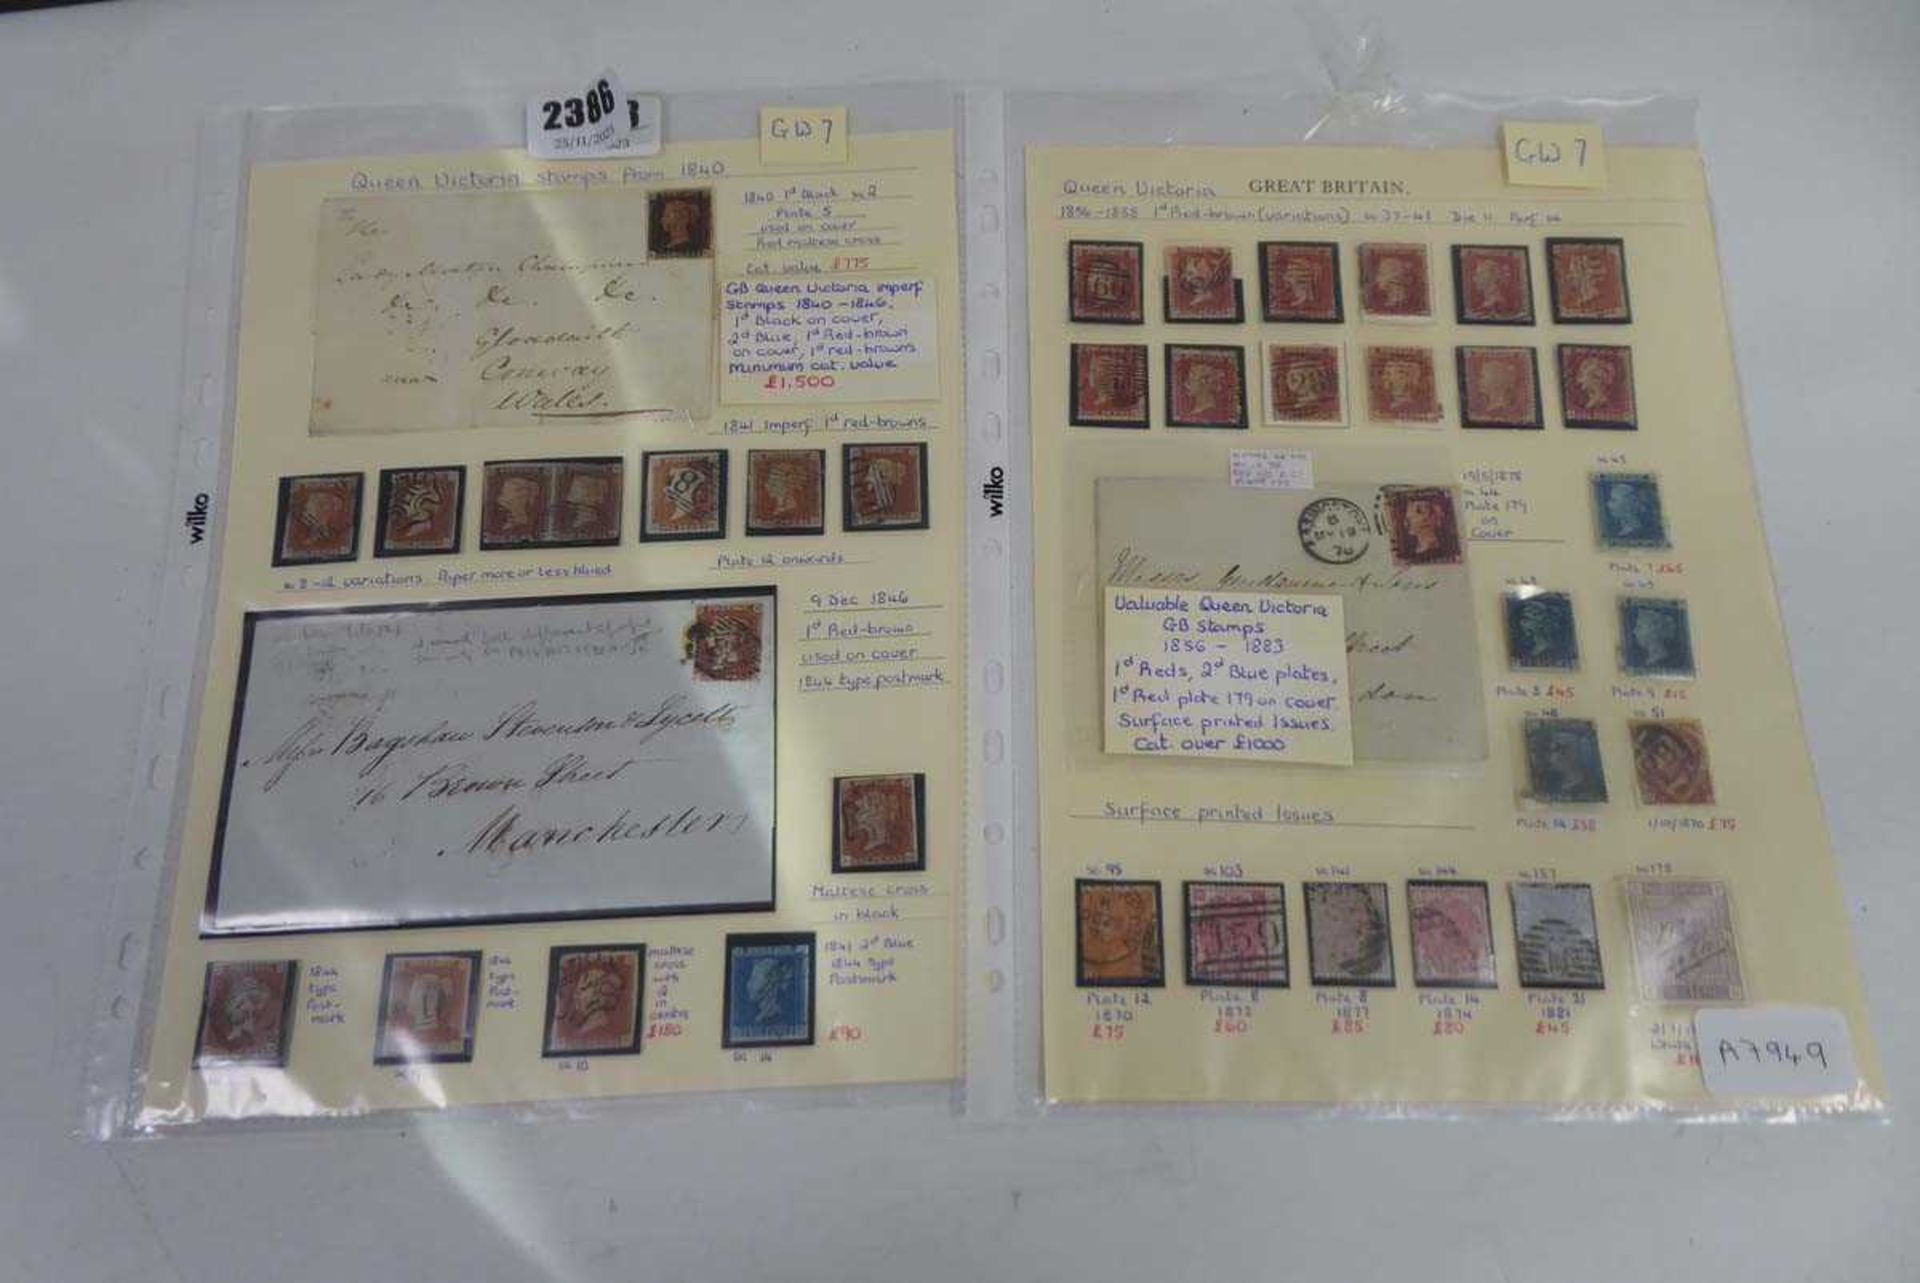 Quantity of Queen Victoria stamps including 1d black and 2d blue, dating from 1840s, some on